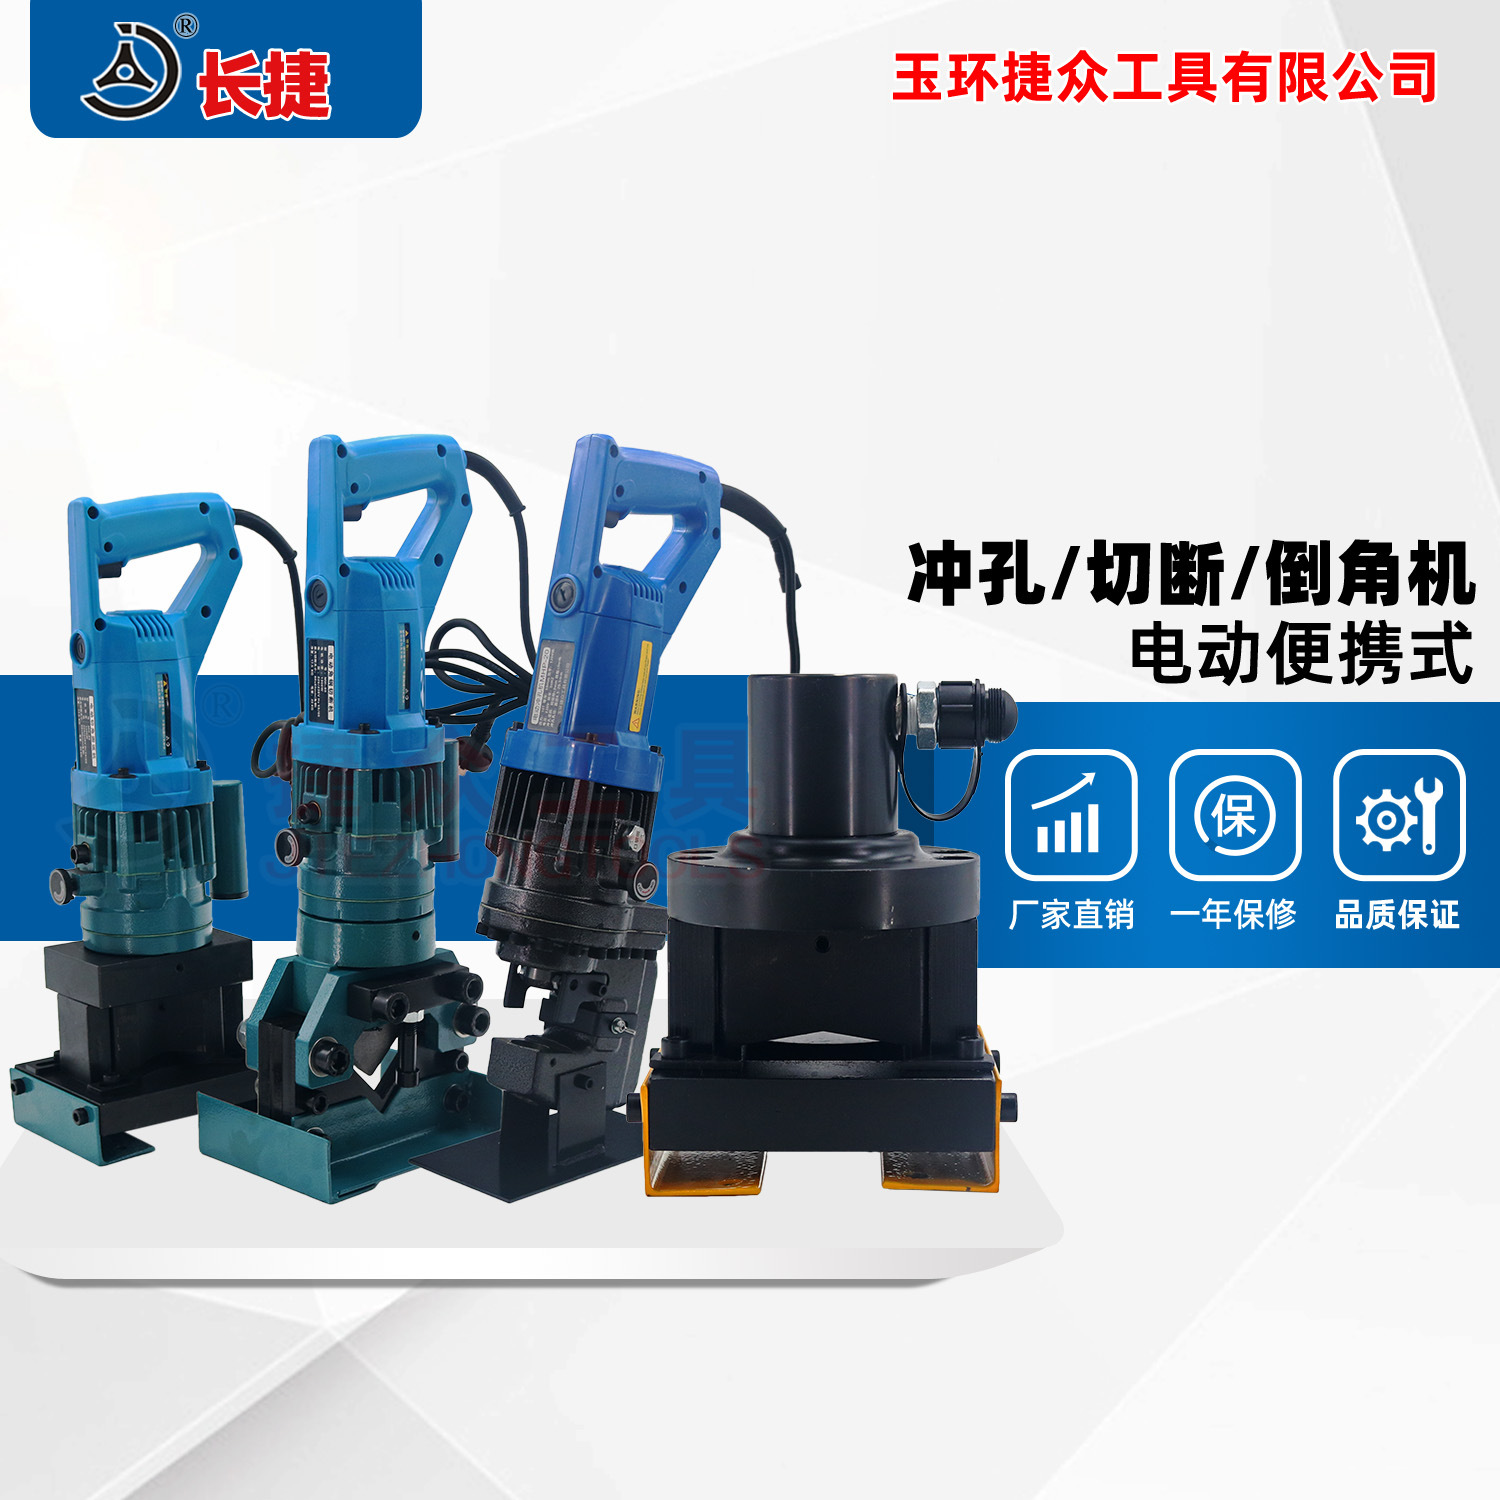 Long Jie multi-function Electric Angle steel Chamfering machine Cut and invert the angle iron 45 Arc Two-in-one Package Discount